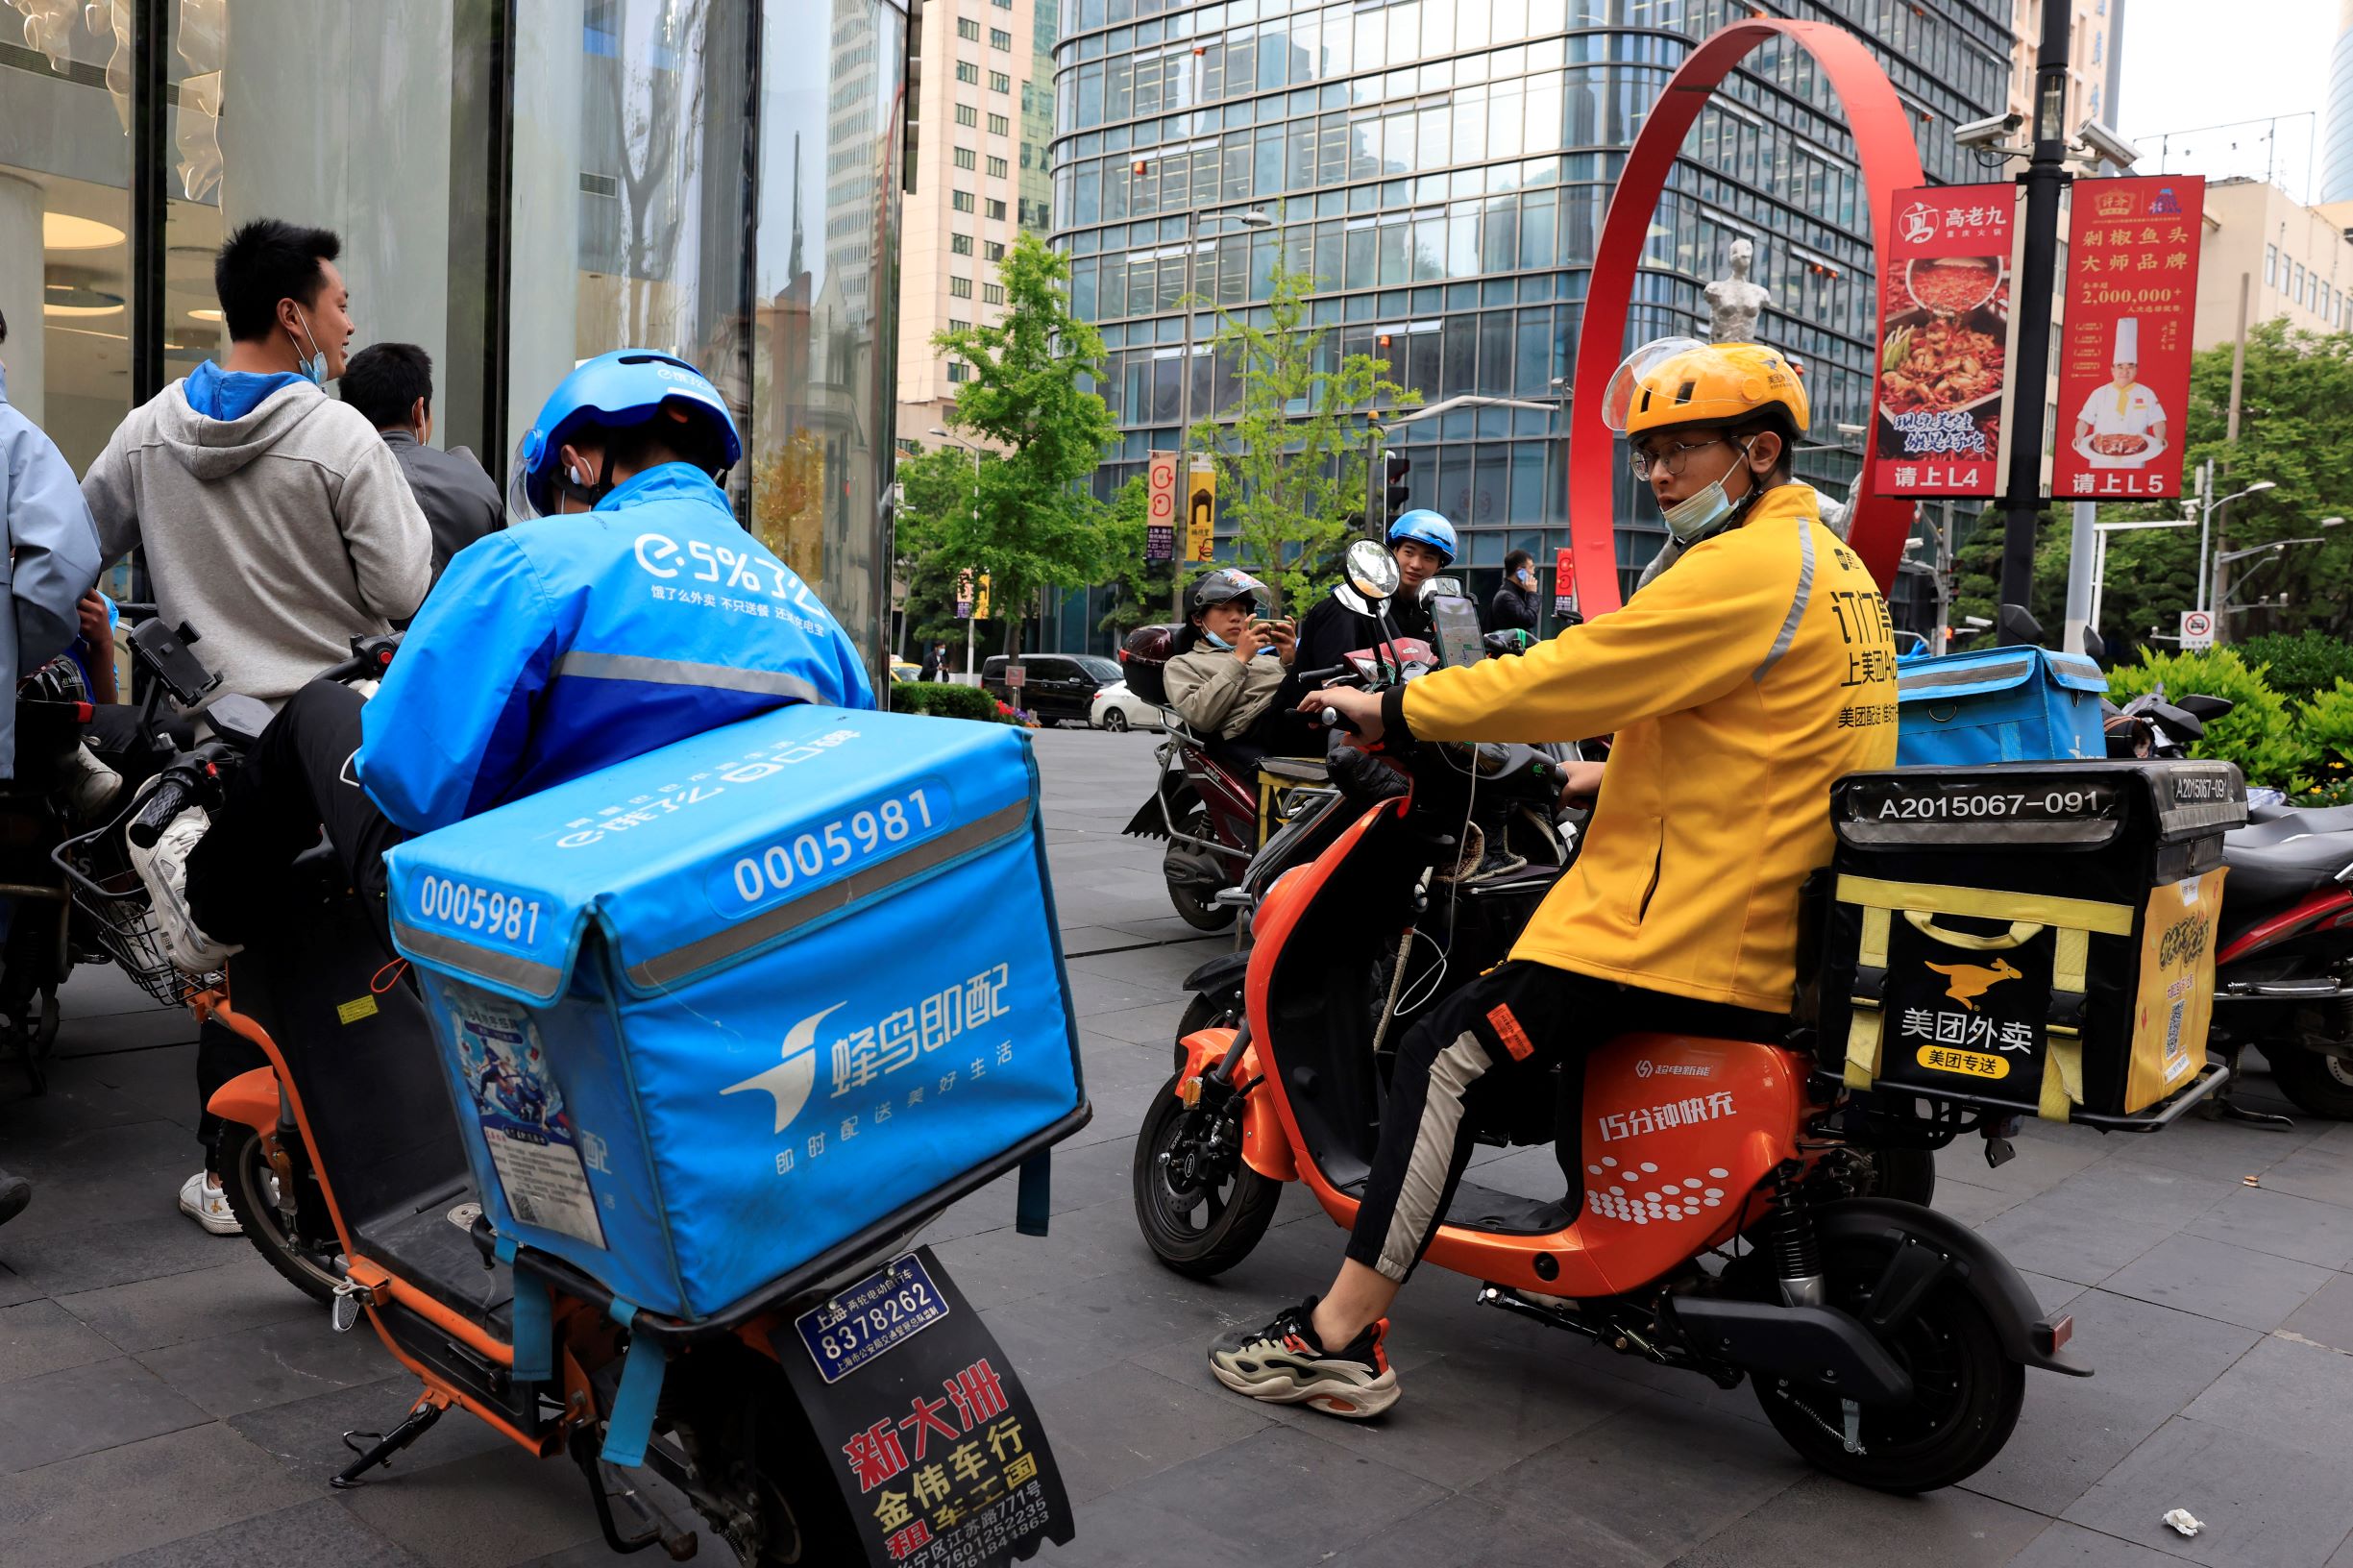 China Probes Takeout Firm Meituan Over Antitrust Concerns